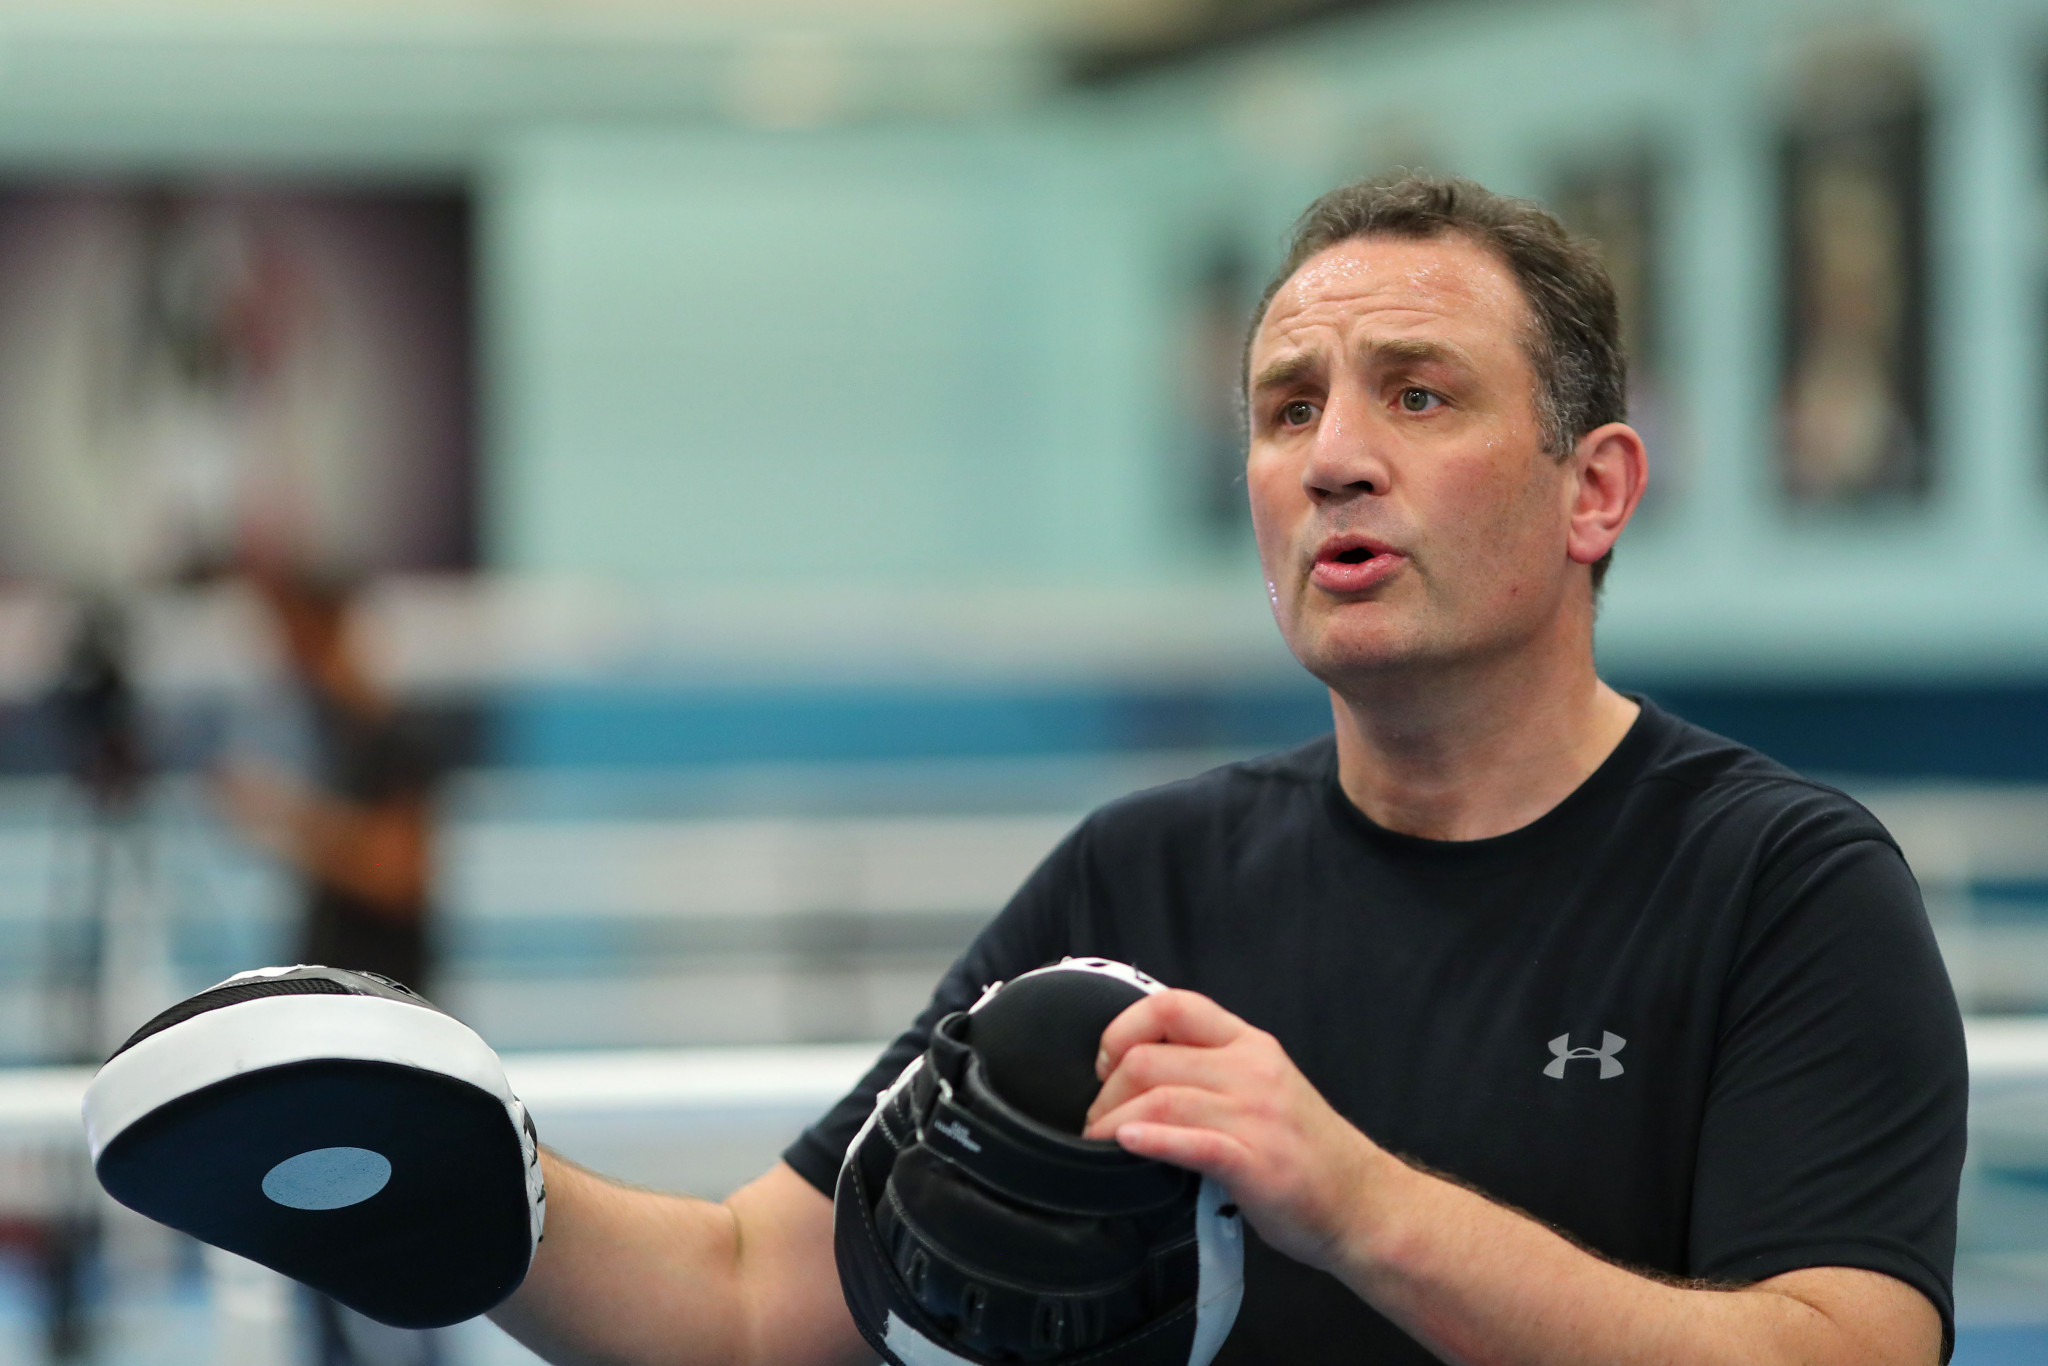 British Lionhearts coach Rob McCracken, pictured, also trains Olympic gold medallist and current IBF, IBO and WBA unified heavyweight champion Anthony Joshua ©Getty Images